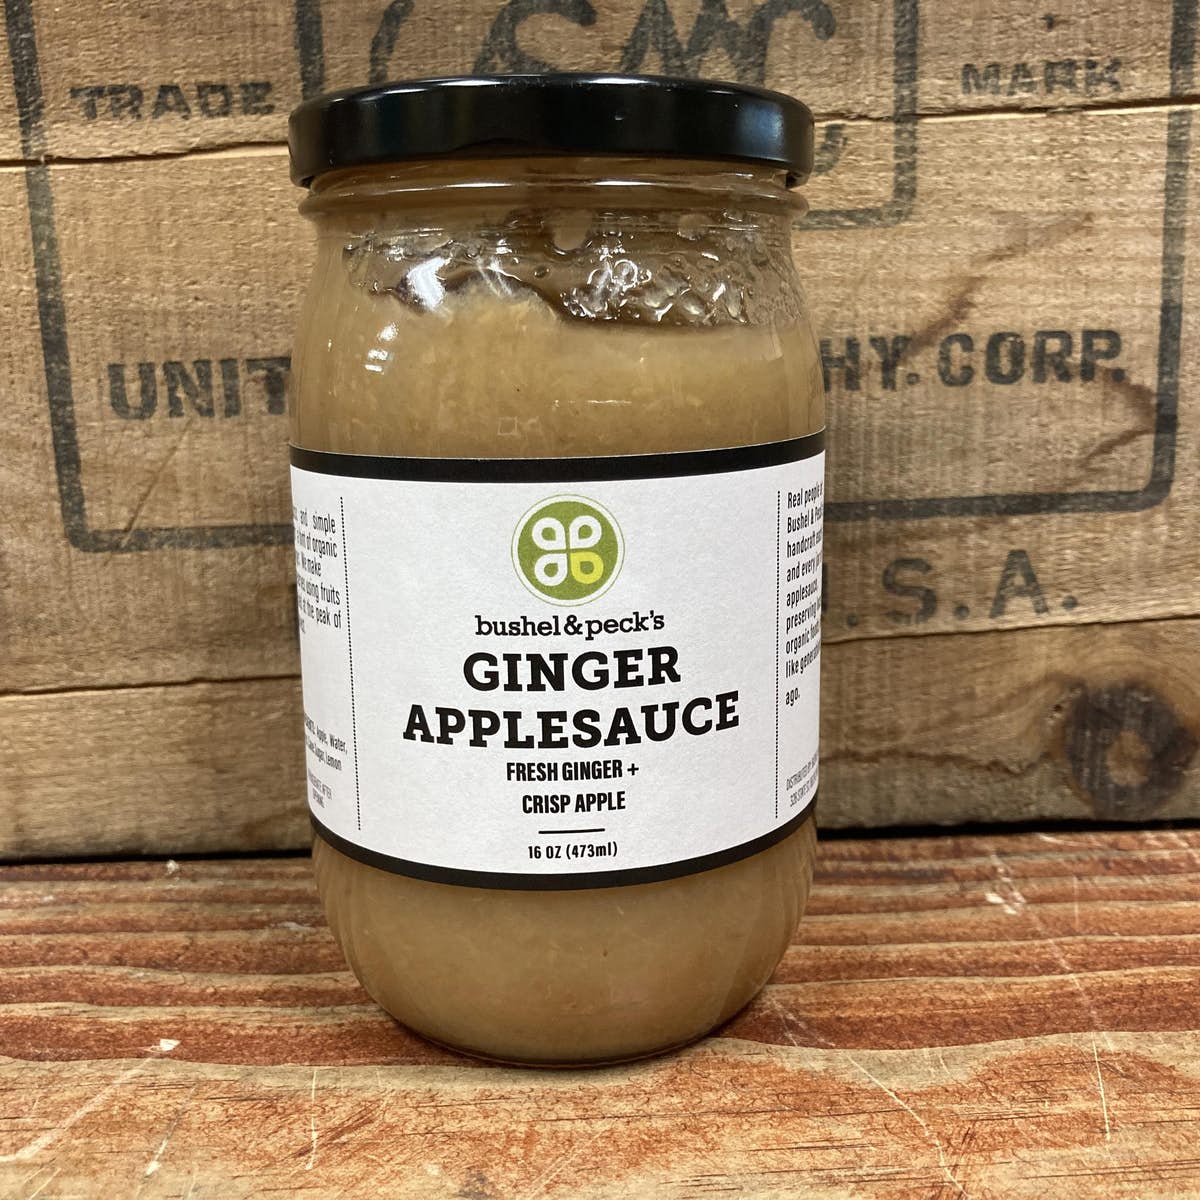 Ginger Applesauce made by B&P